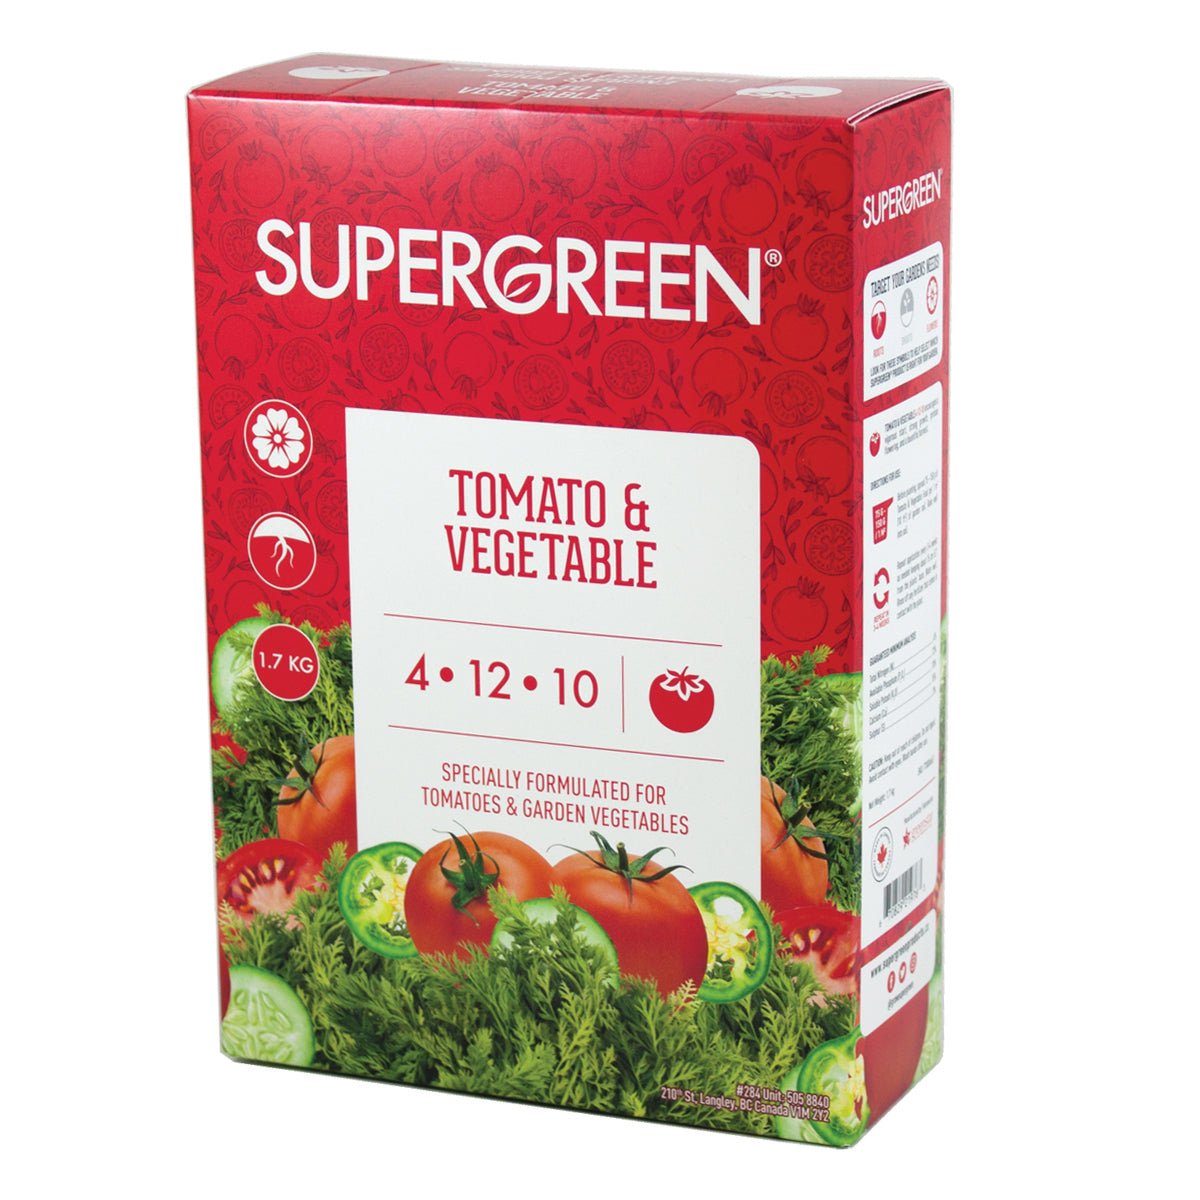 Product Image:Supergreen Tomato and Vegetable 4-12-10 1.7kg